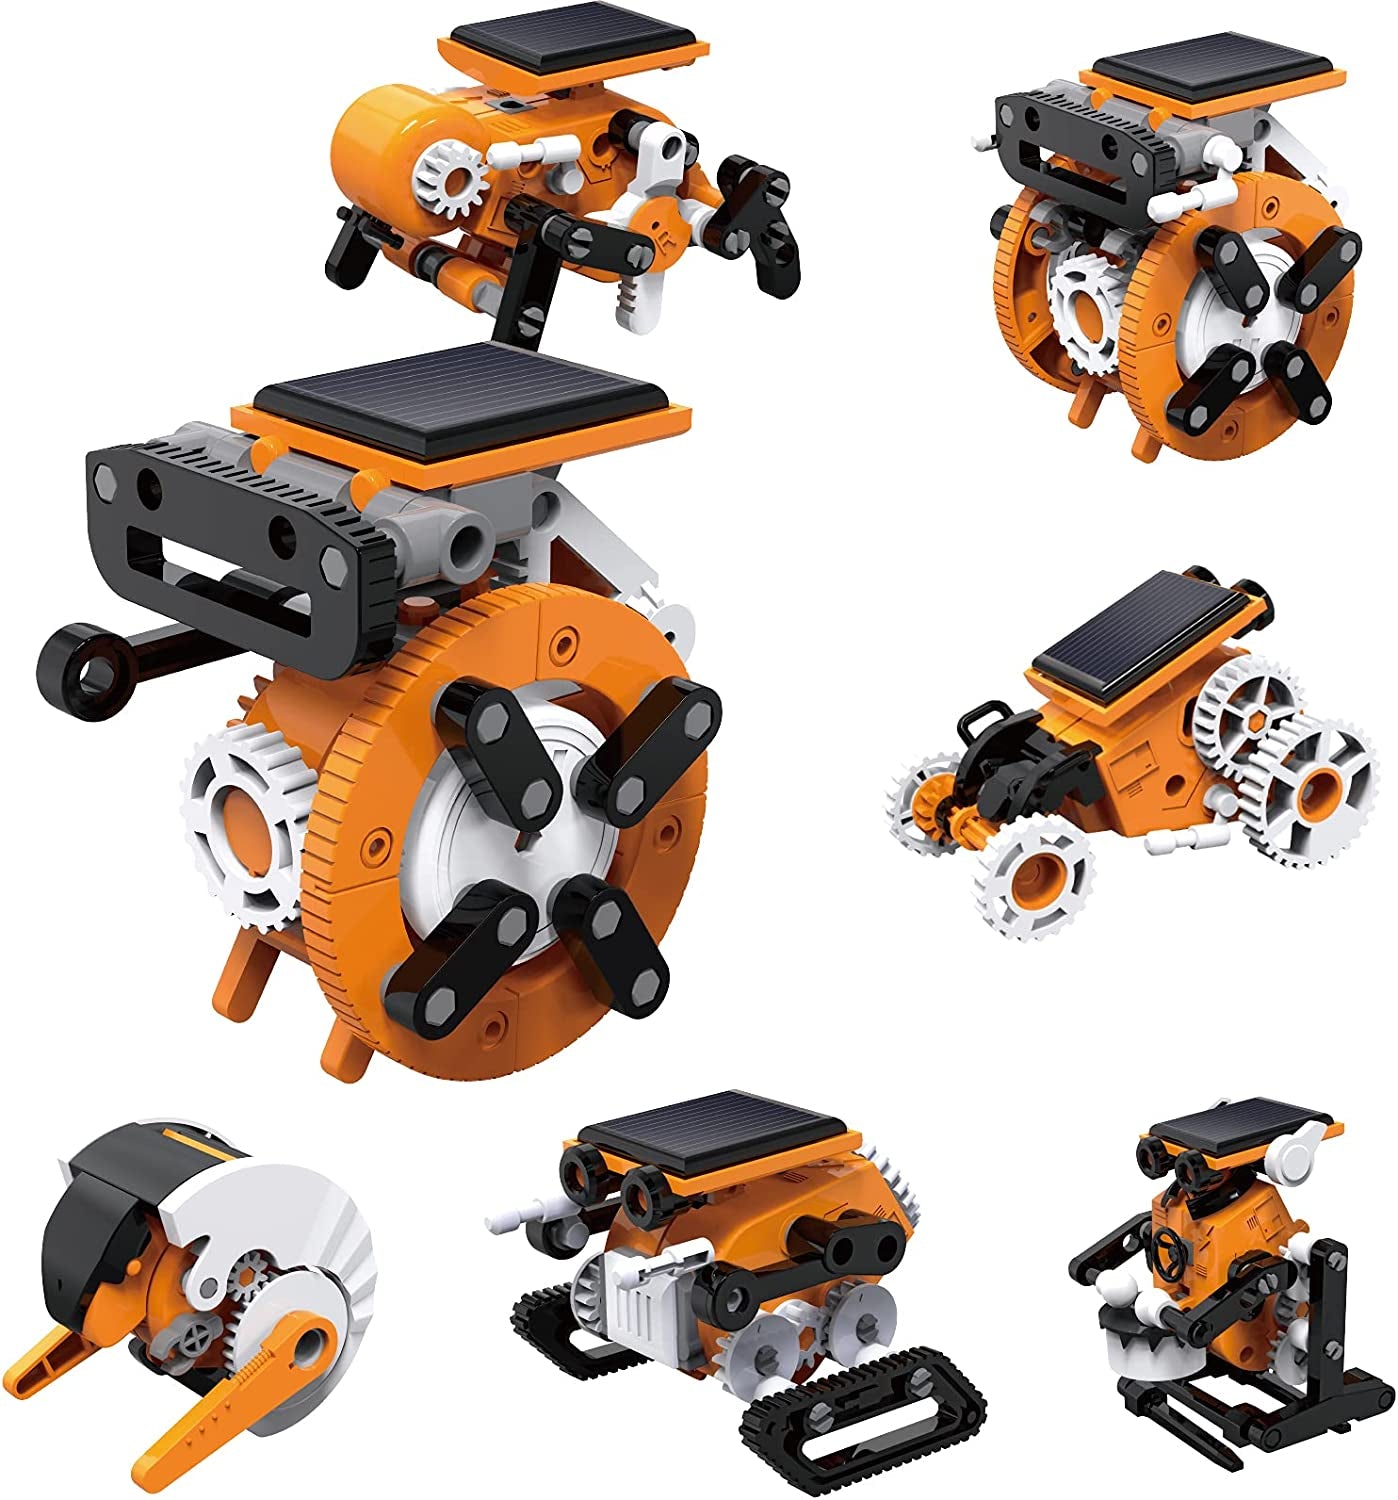 Solar Robots for Kids STEM Projects for Kids Ages 8-12 7-In-1 Science Educational Building Toys Gifts for Boys, Girls